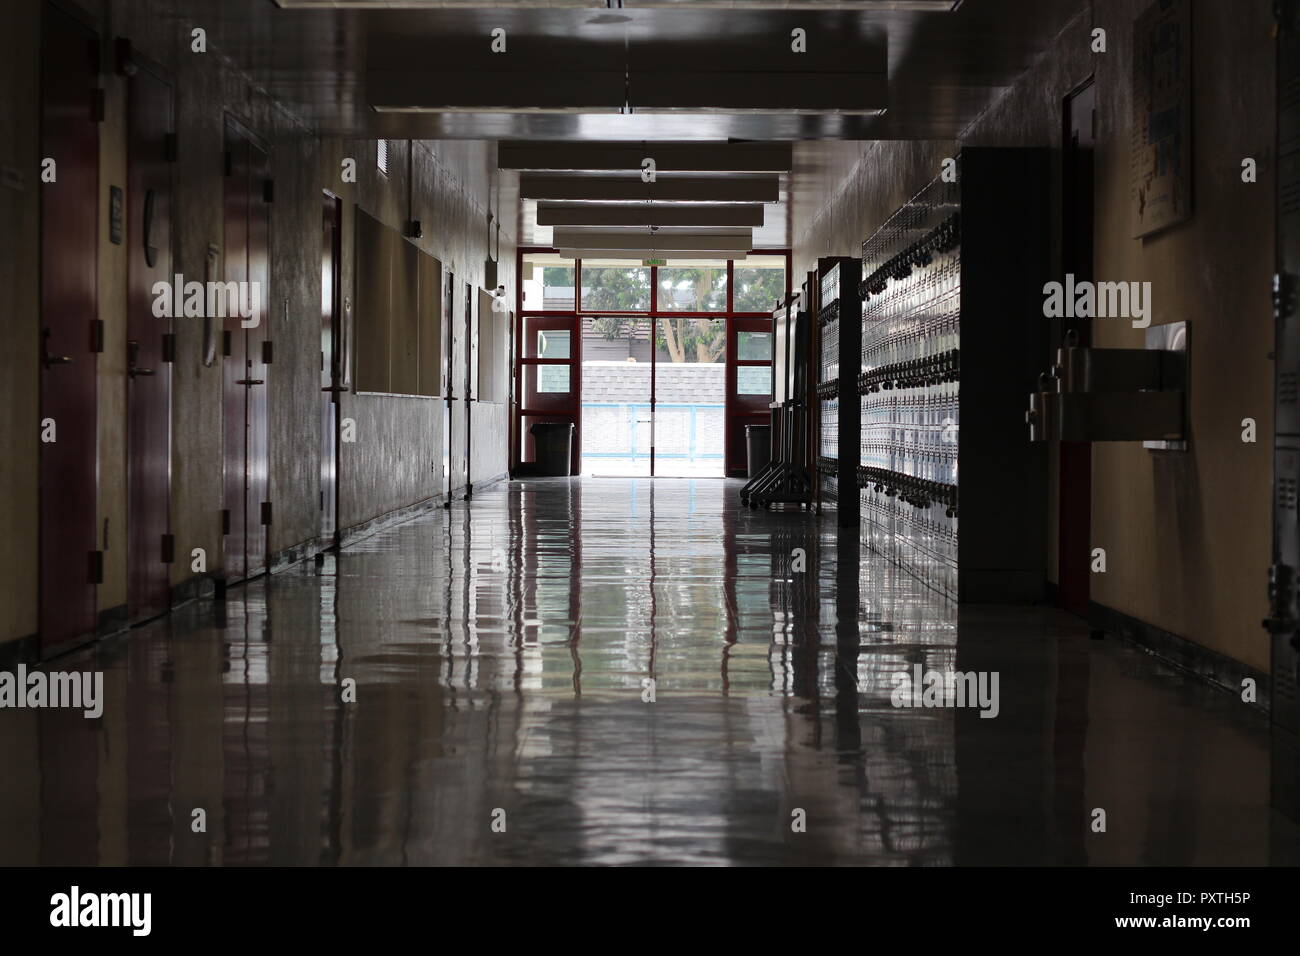 A dark and empty school hall and shiny floors during the day with lockers and class doors on each side and open red doors in the background Stock Photo